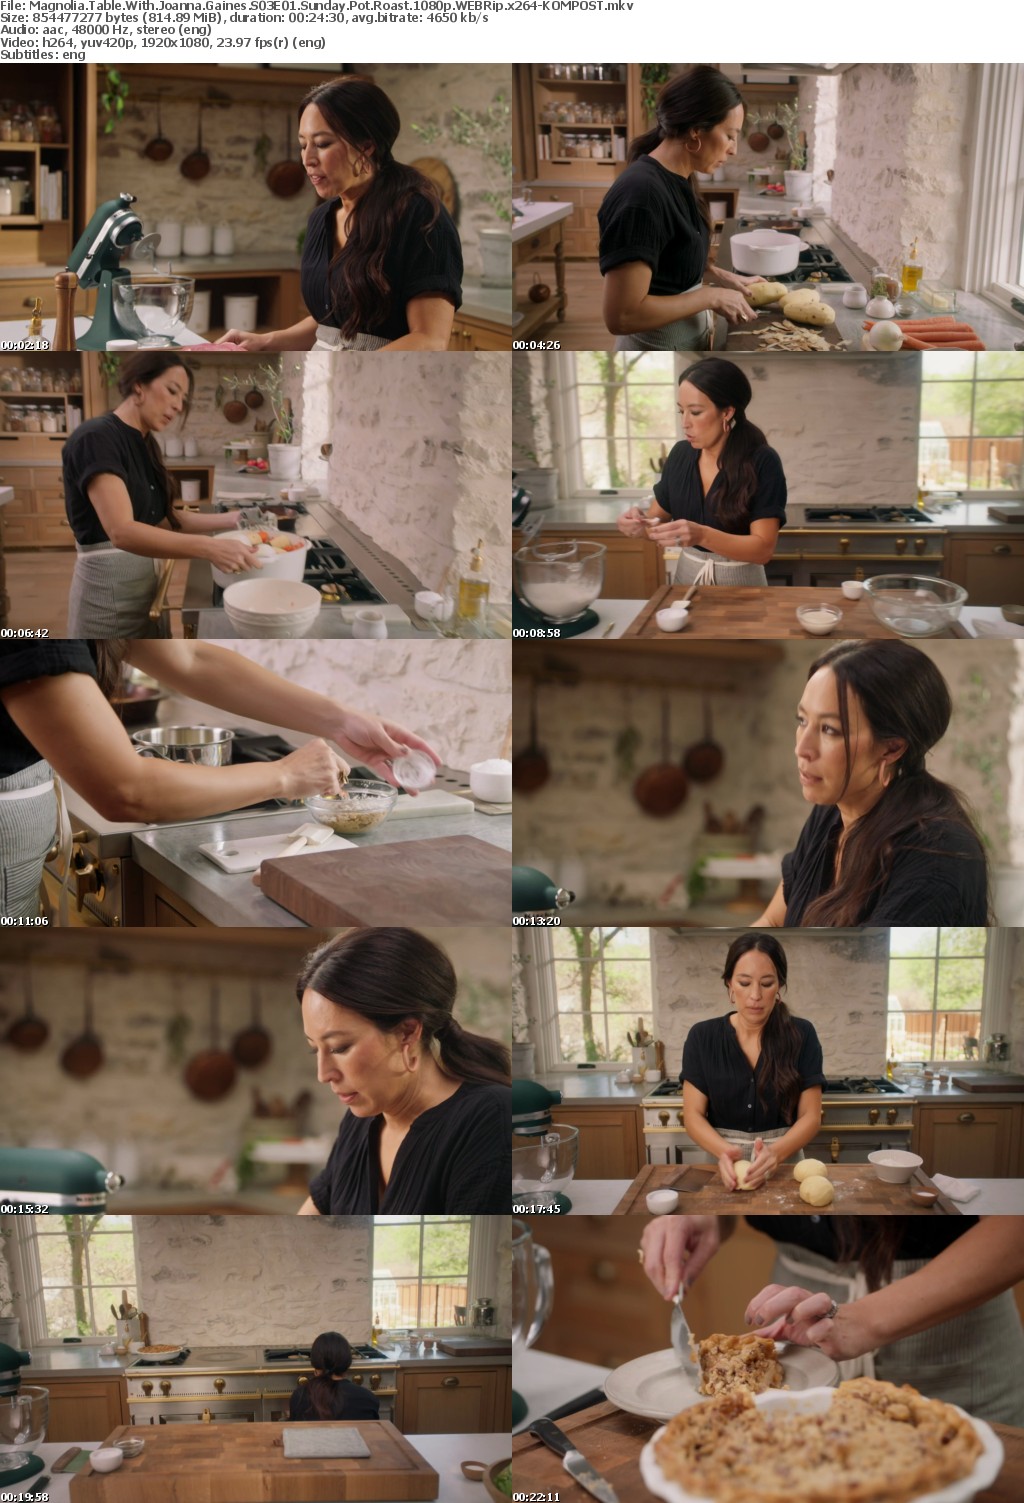 Magnolia Table With Joanna Gaines S03 1080p WEBRip AAC2 0 x264-KOMPOST